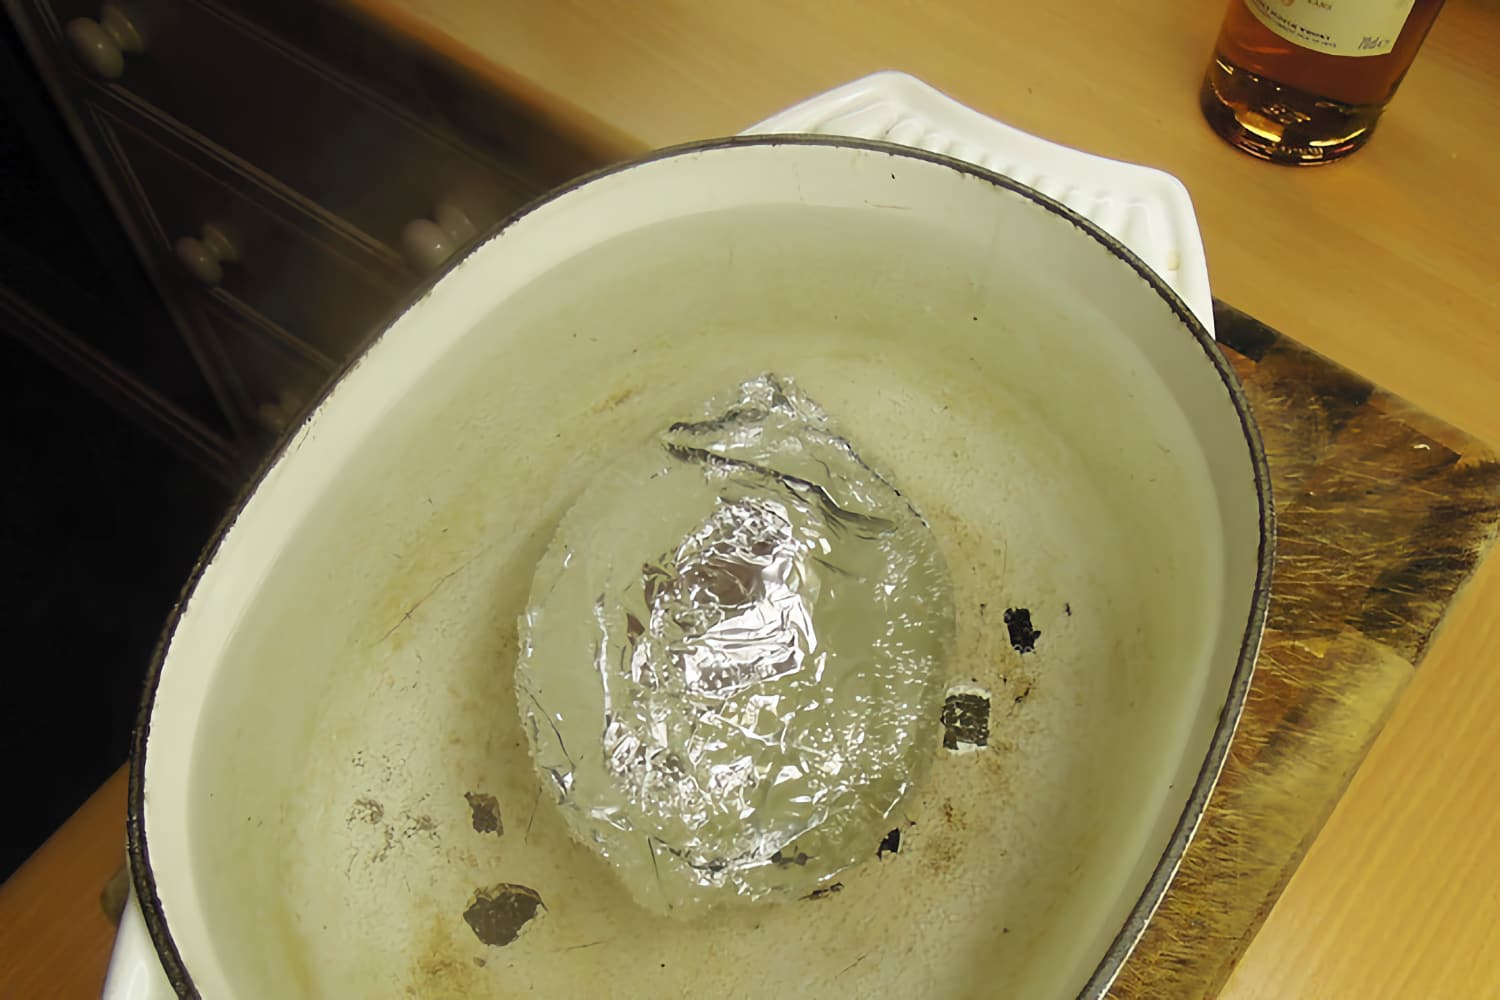 Cooking the haggis in foil